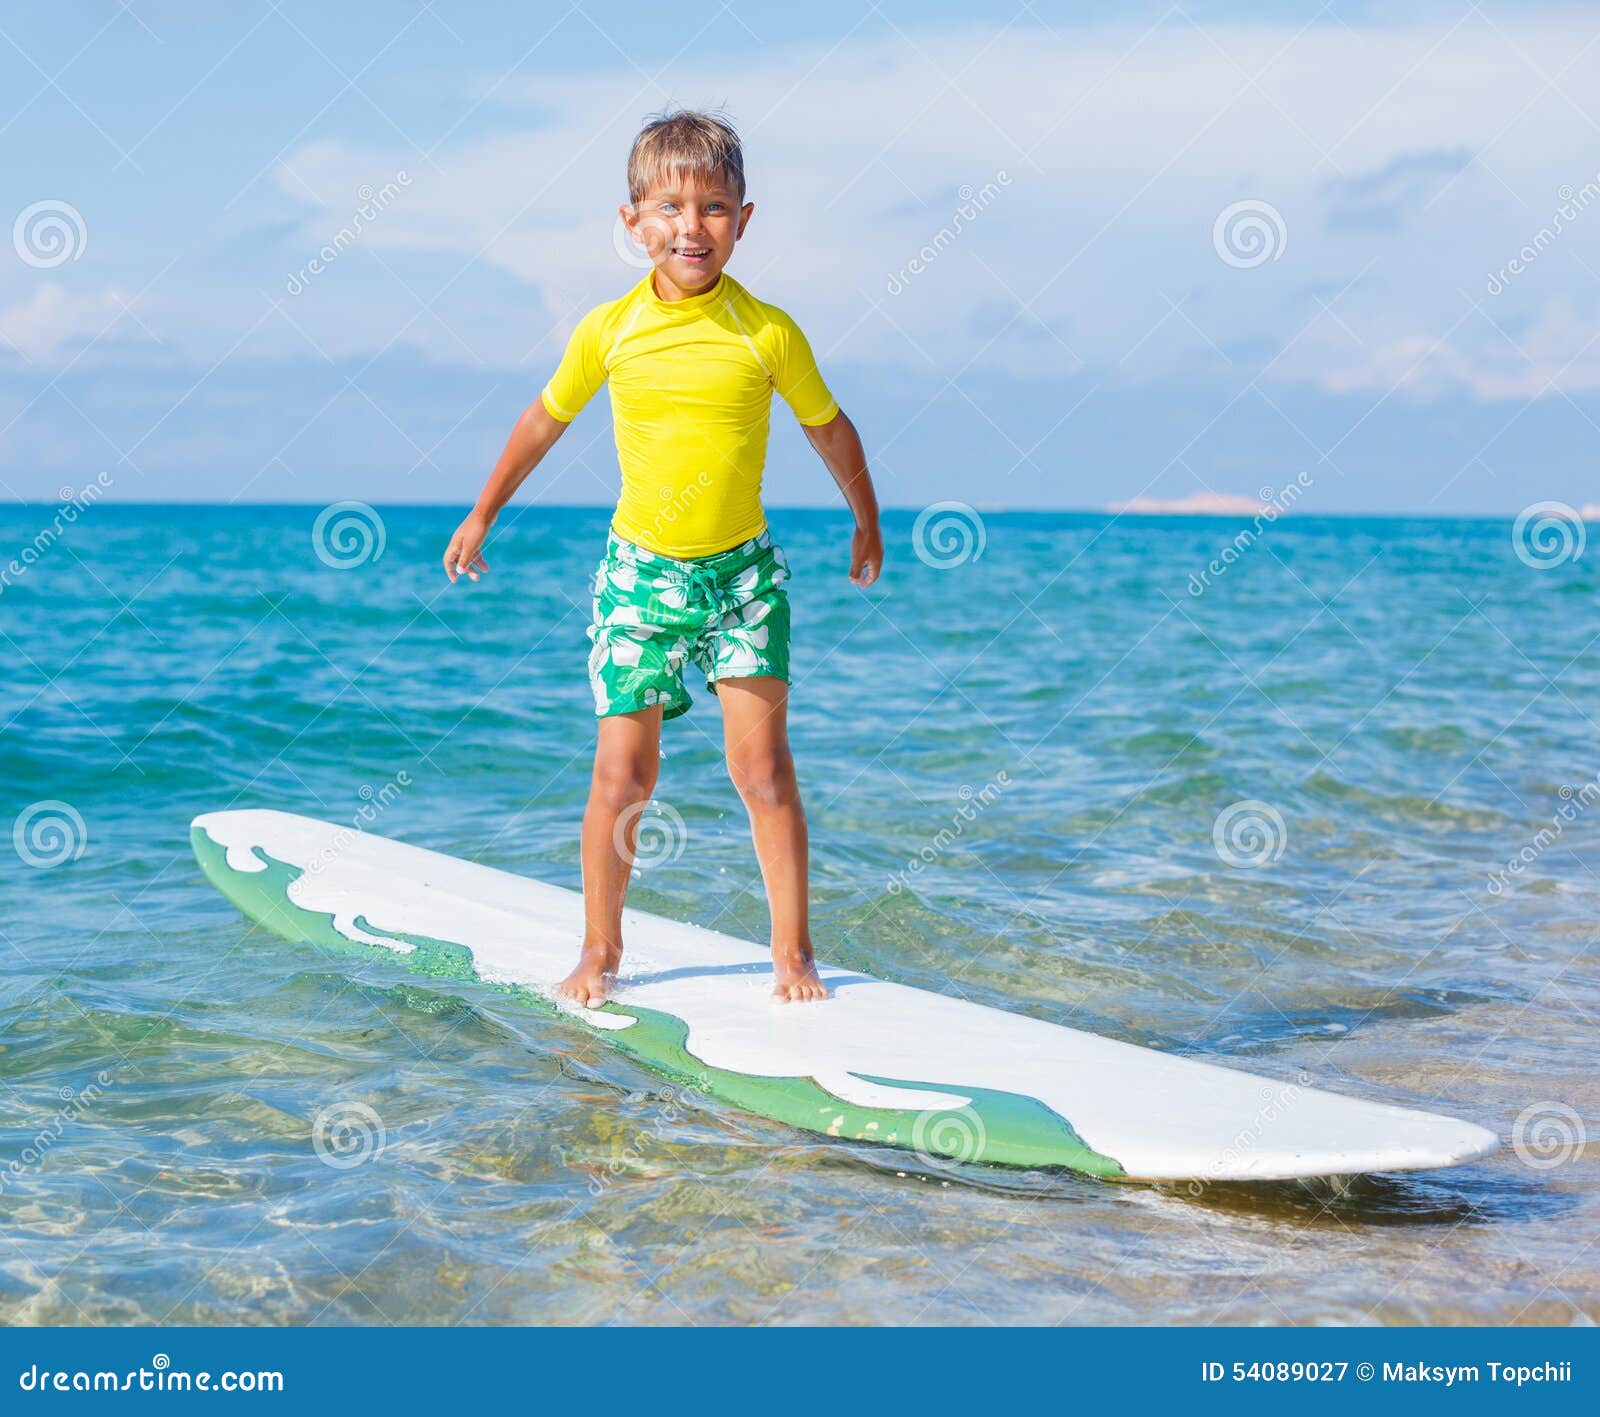 Boy with surf stock image. Image of person, joyful, happiness - 54089027